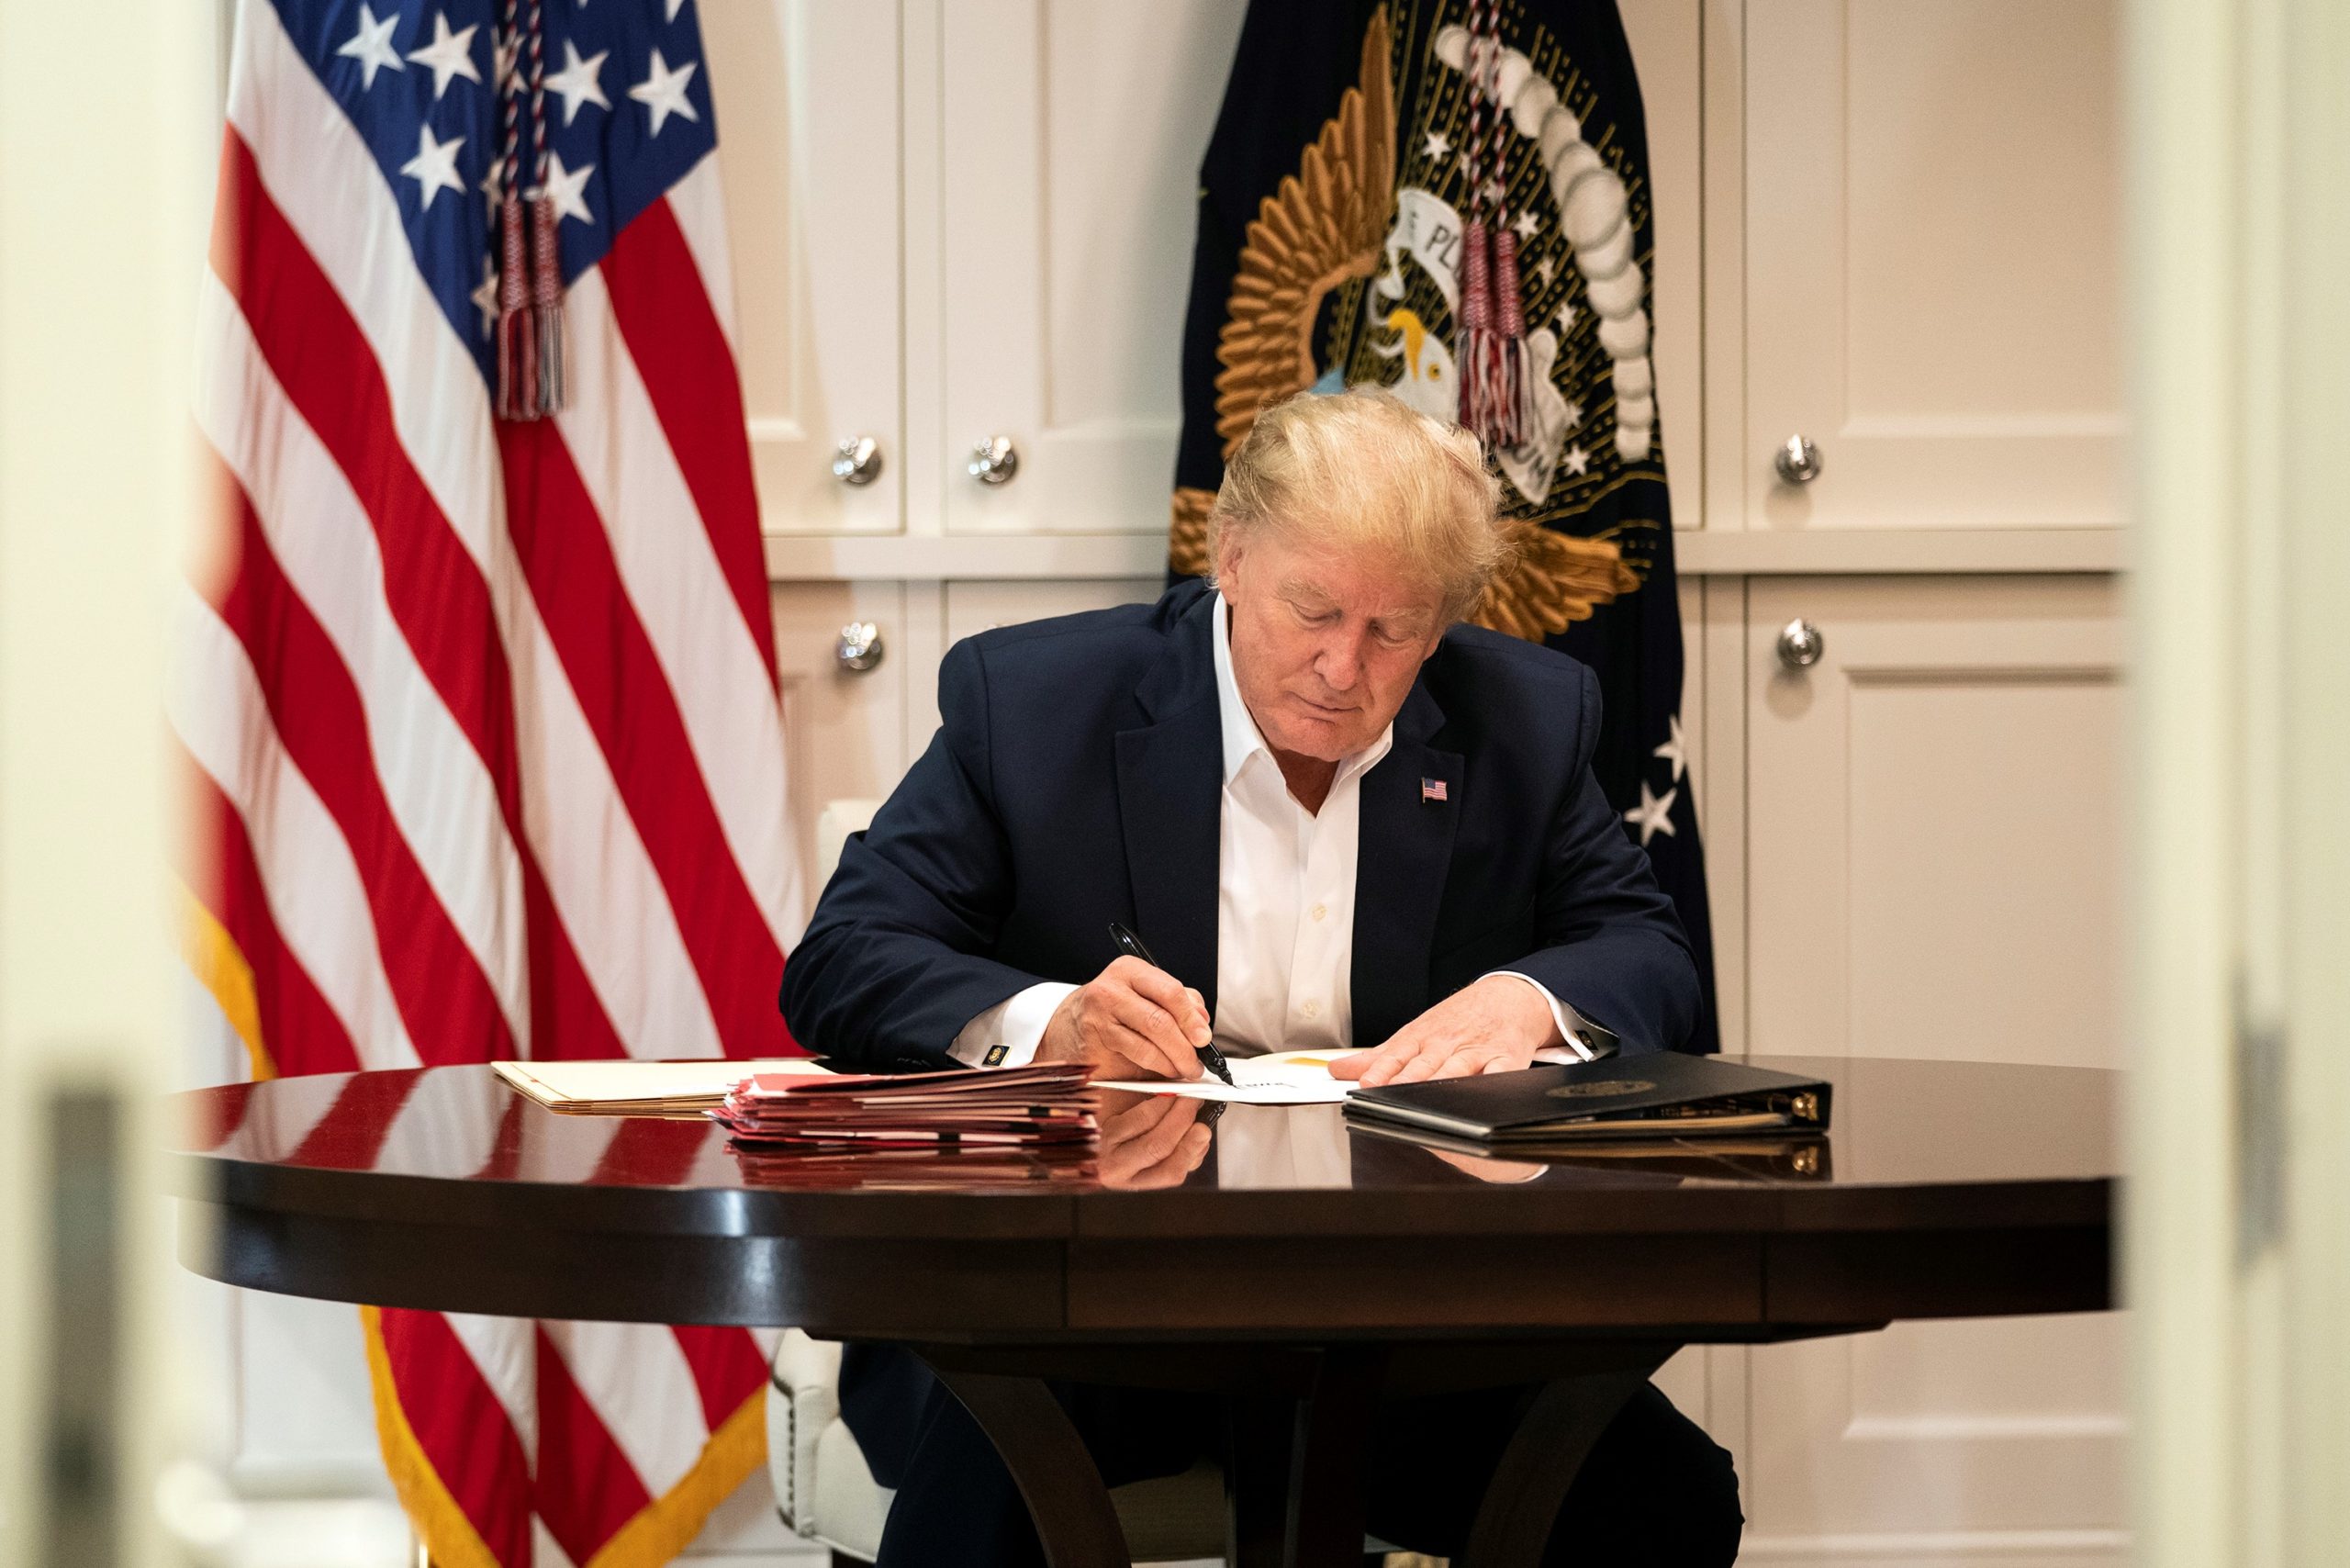 Donald Trump, uncle of Mary Trump, signs a blank piece of paper inside the Presidential Suite at Walter Reed National Military Medical Center, in a photos the White House claimed featured the President at work